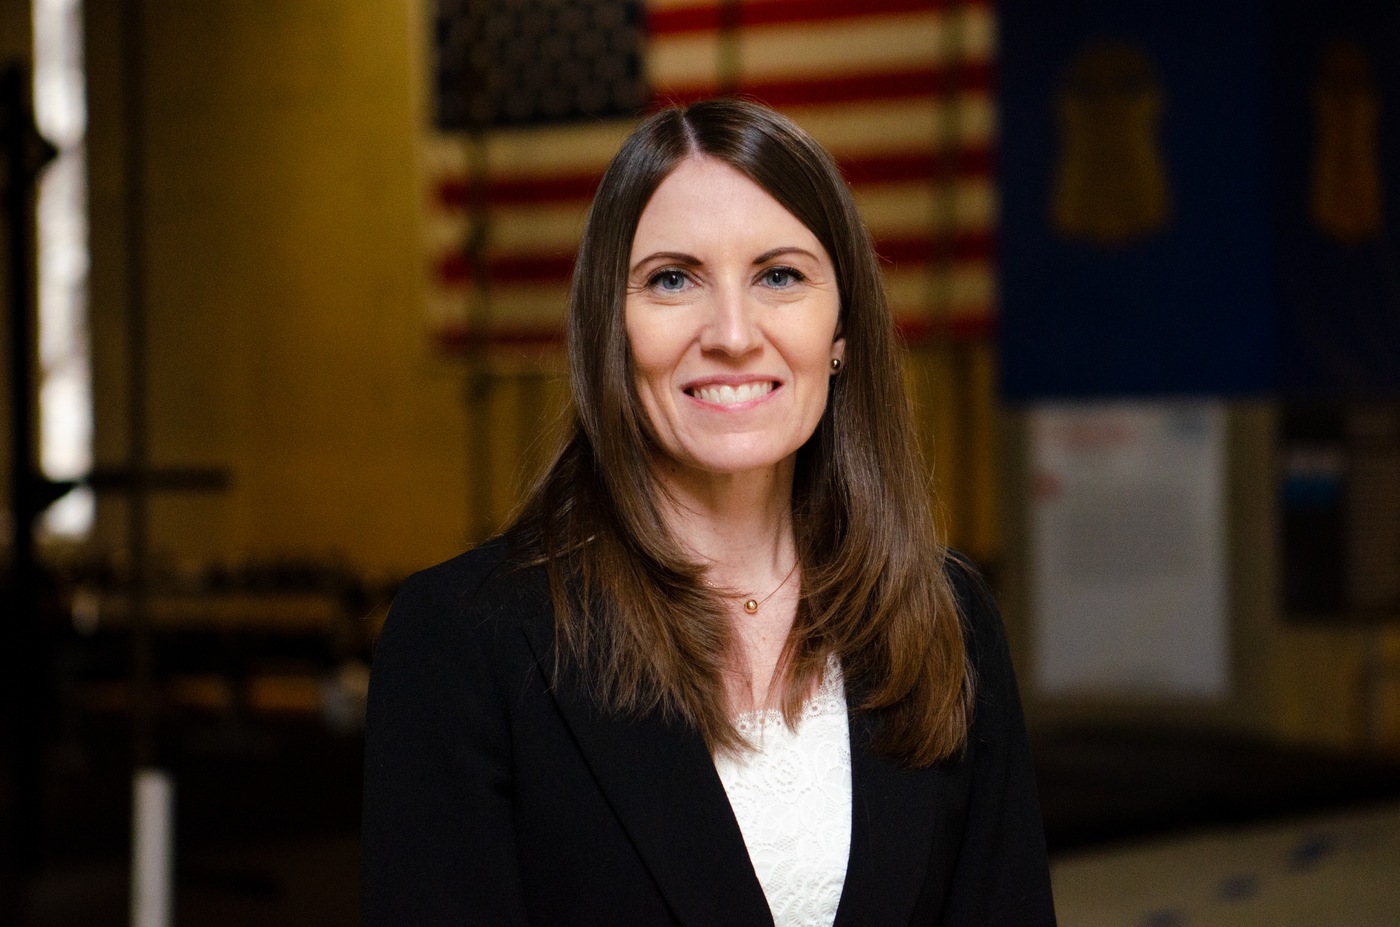 Regina Thompson was named assistant director of the FBI's Victim Services Division in July 2020.